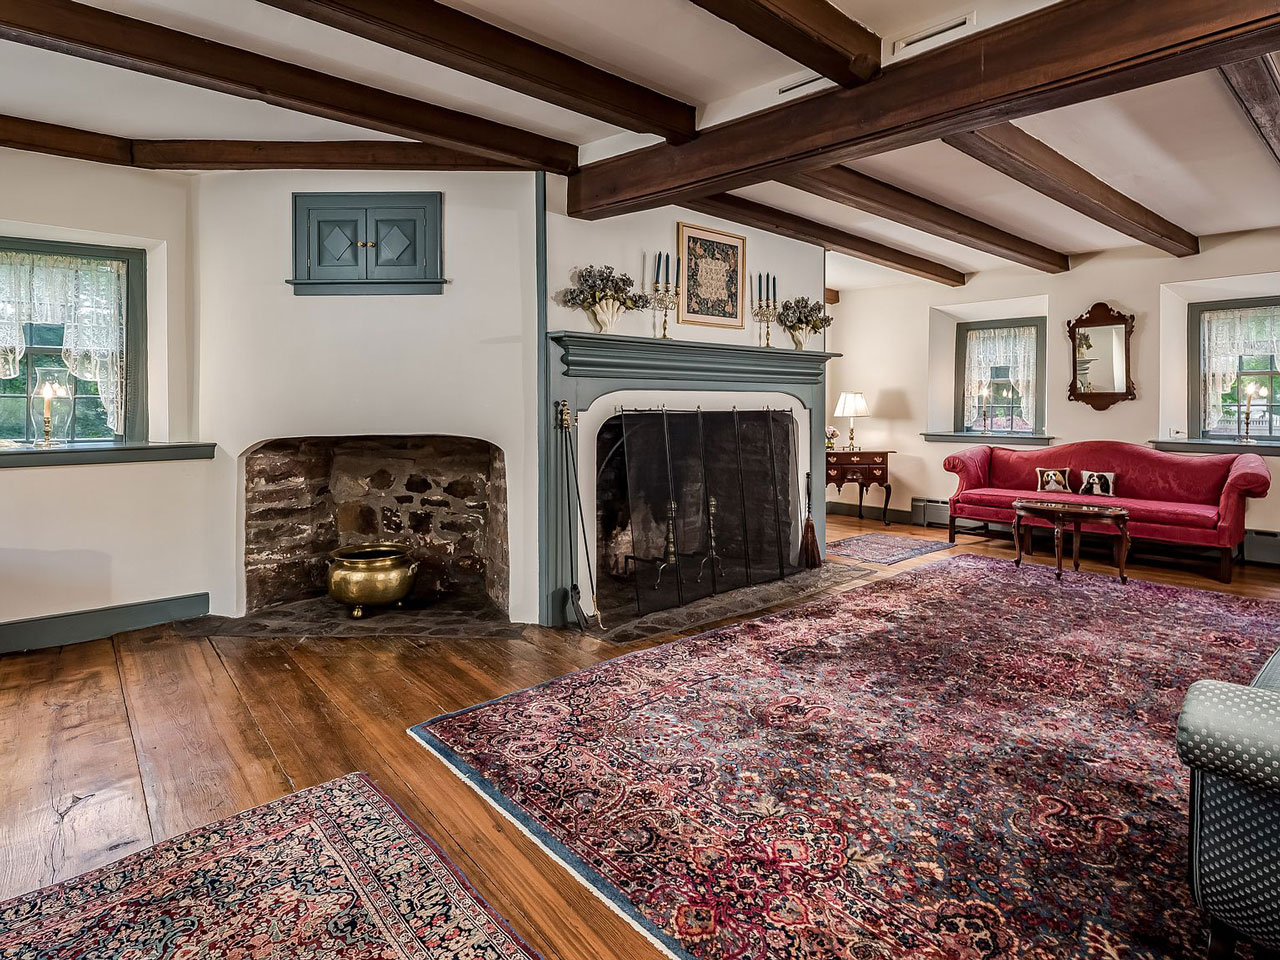 3115 Valley Road Historic Home For Sale Basking Ridge 3